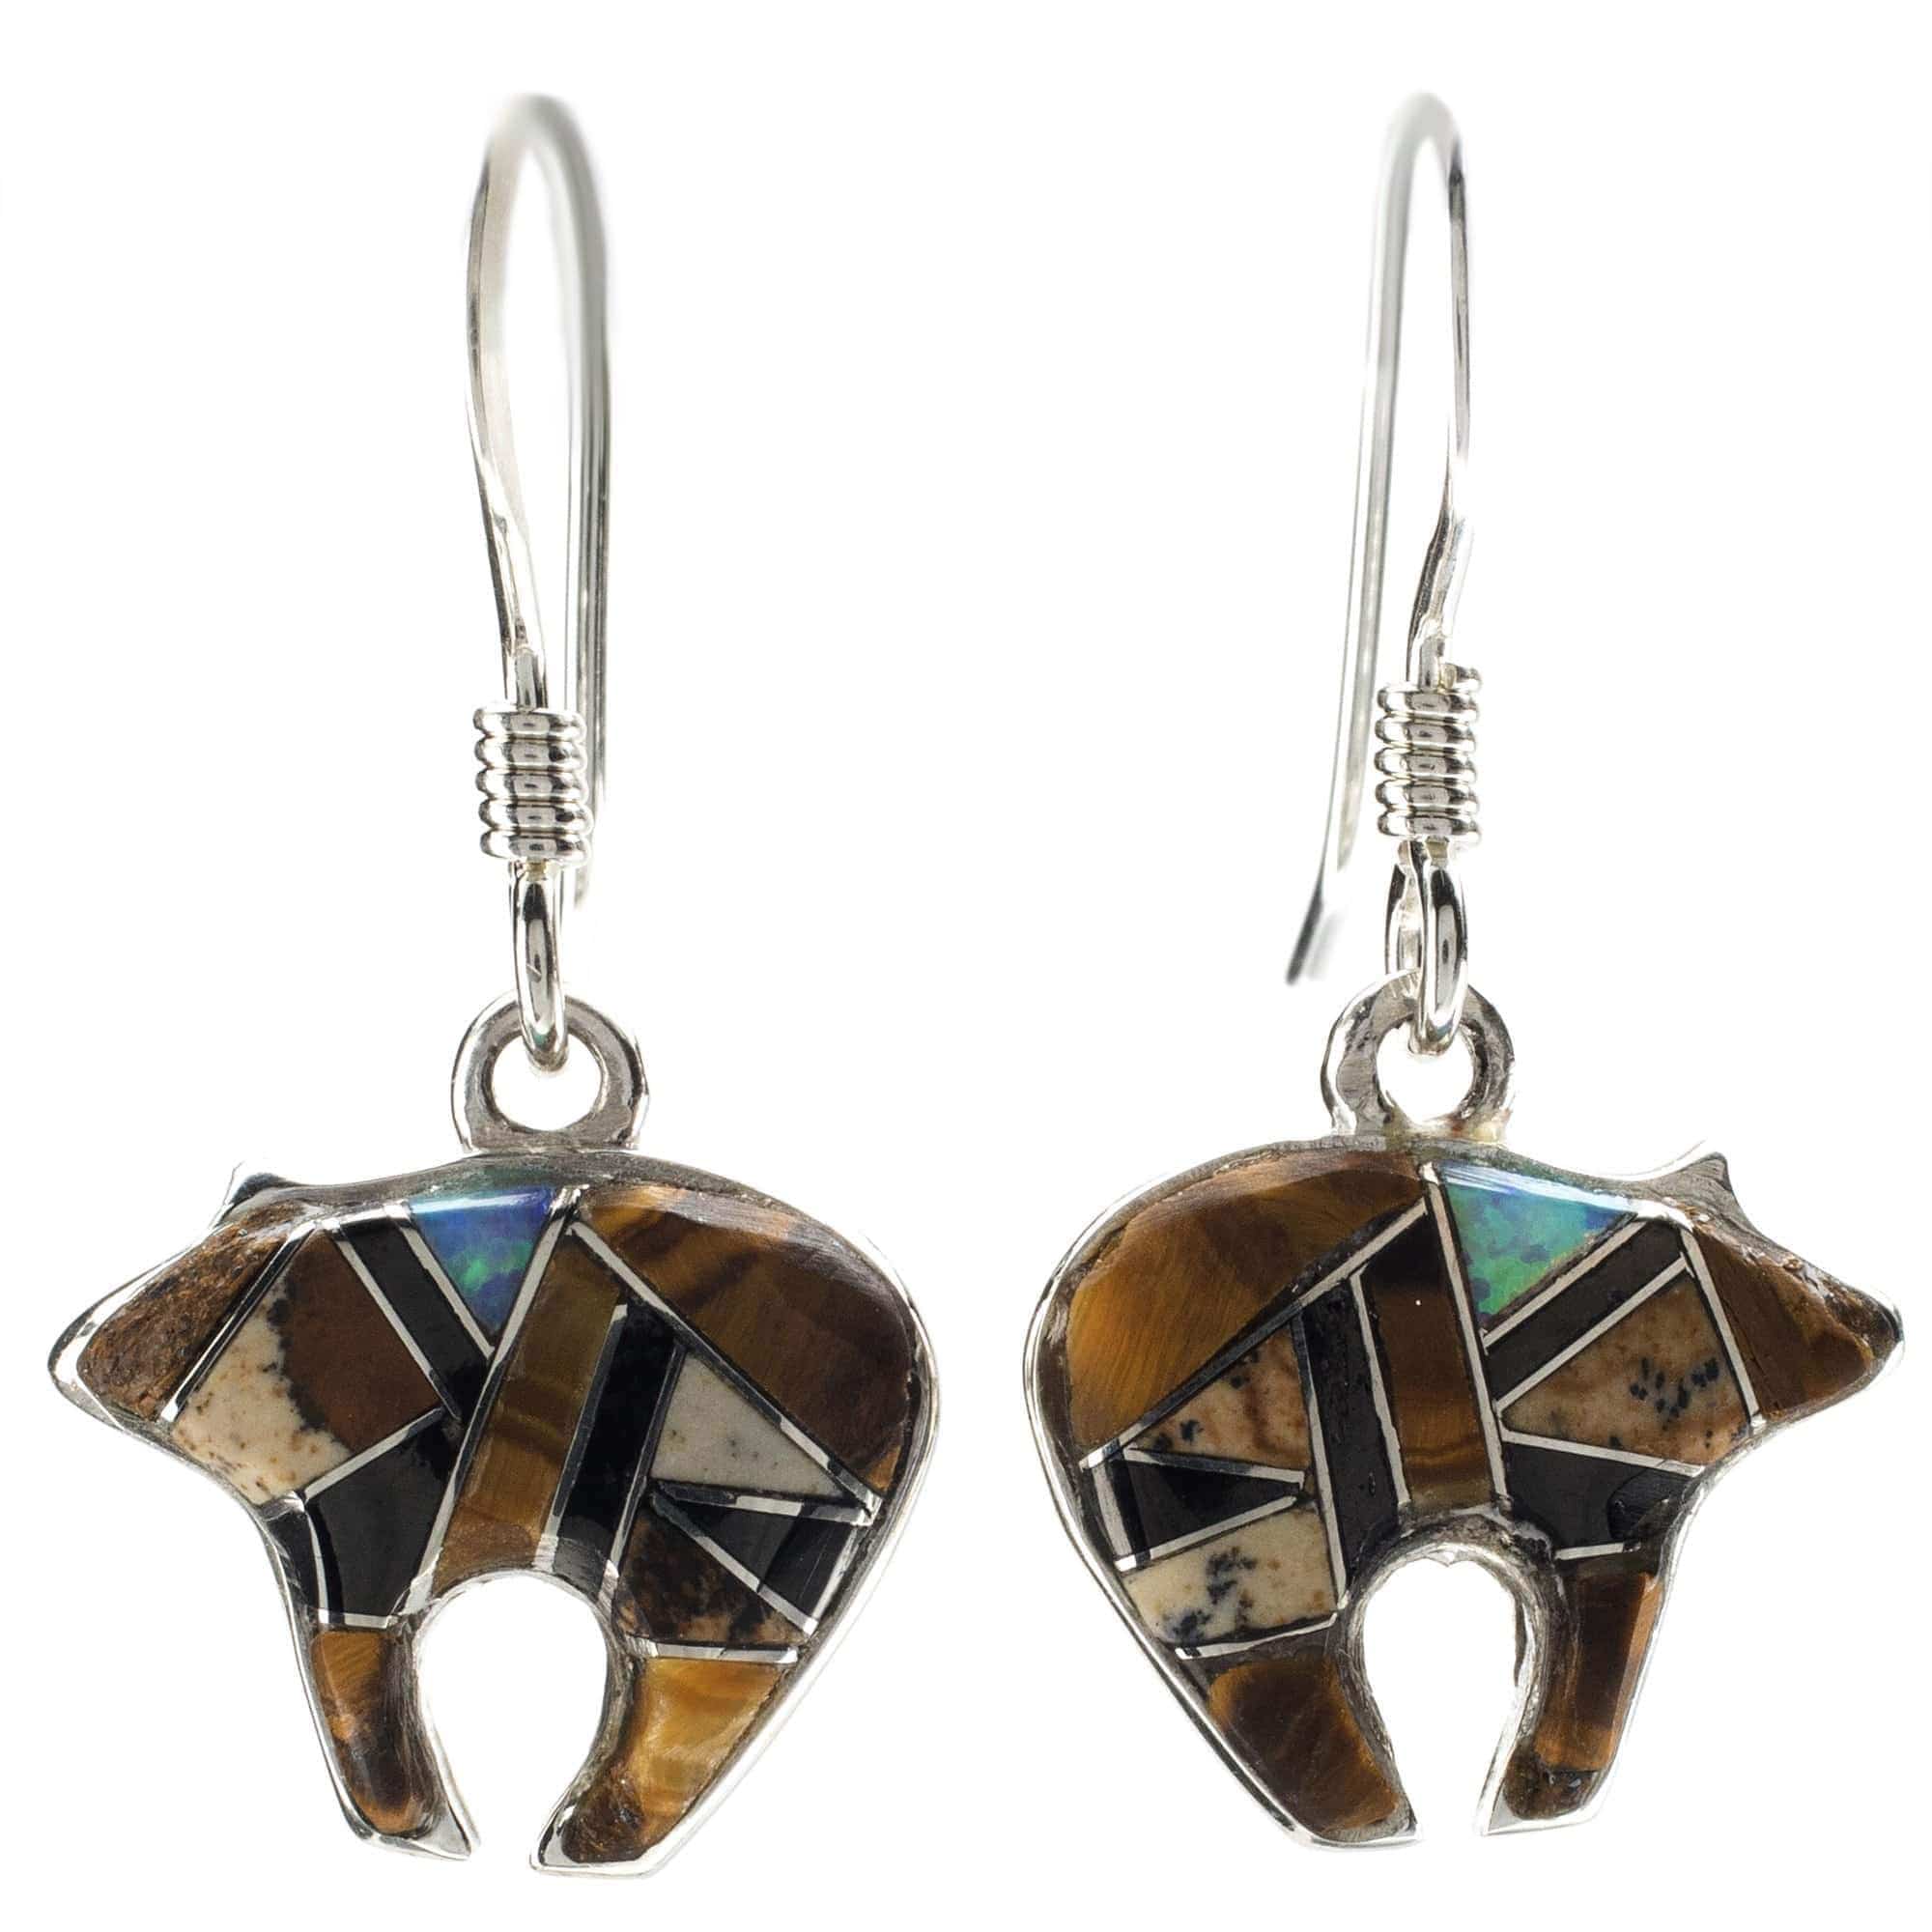 Kalifano Southwest Silver Jewelry Tiger Eye Bear 925 Sterling Silver Earring with French Hook USA Handmade with Aqua Opal Accent NME.2116.TE